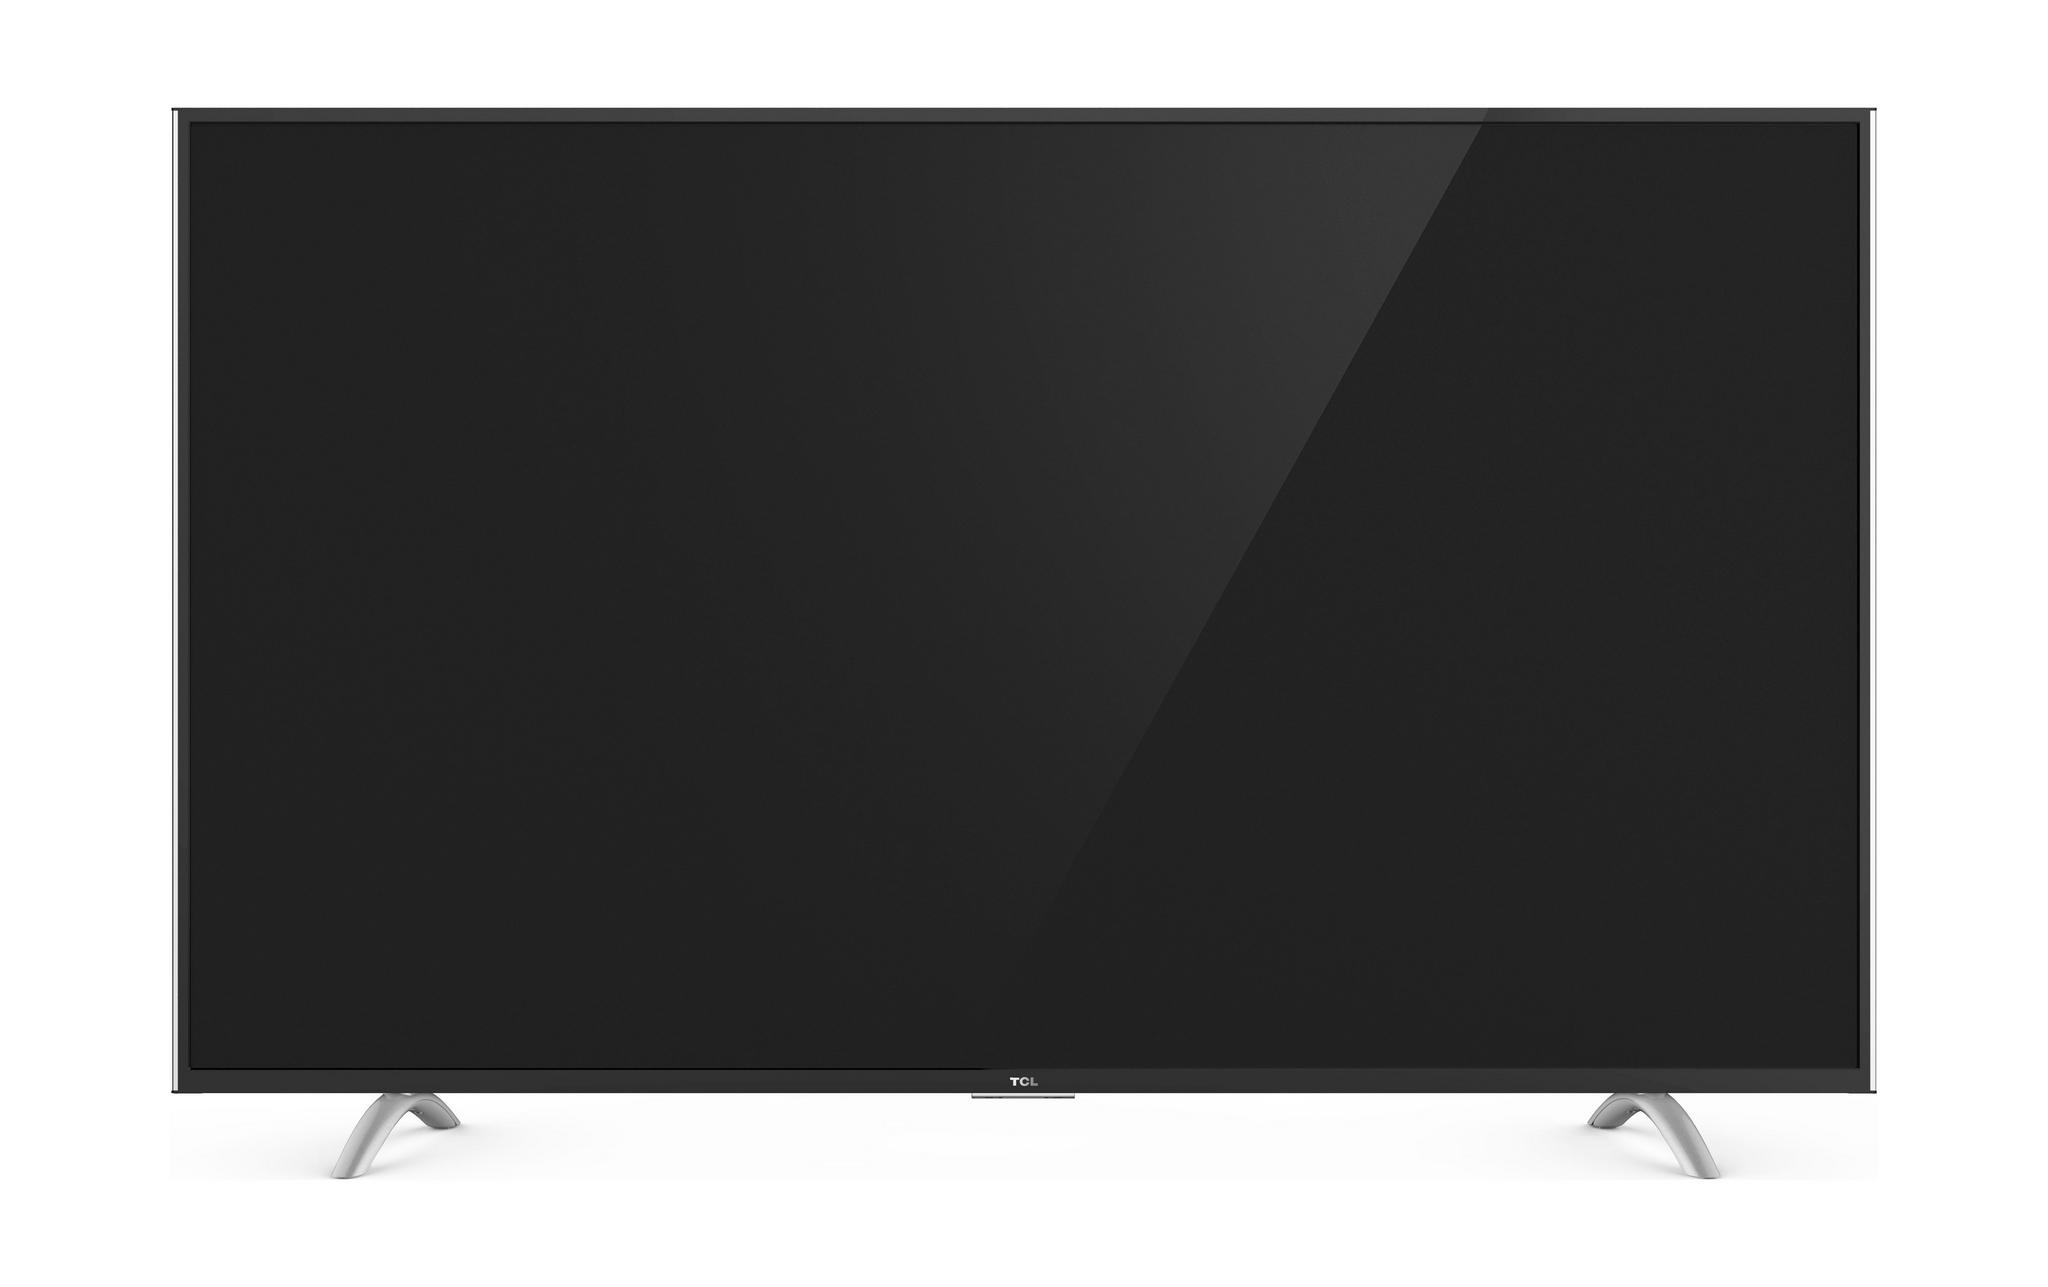 TCL 55-inch UHD (2160p) Android Smart LED TV - 55P1-US